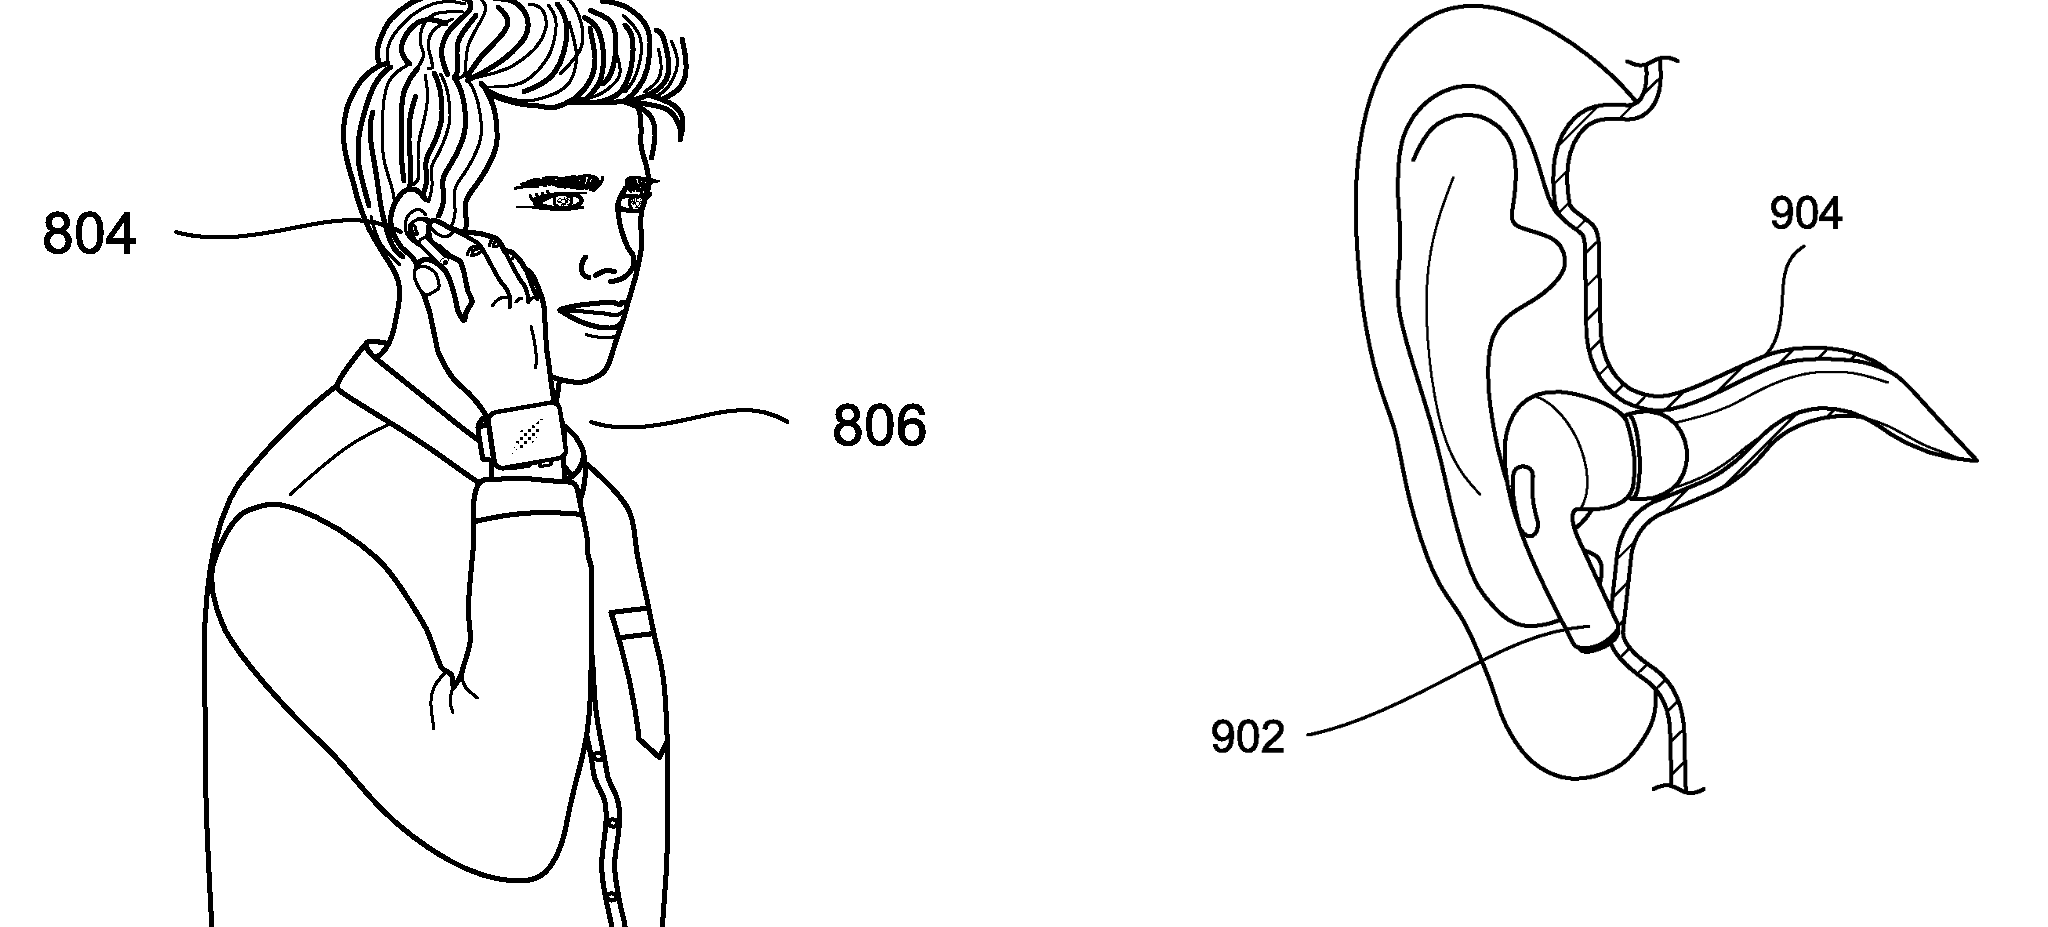 Apple's patent drawing for the AirPods user authentication patent titled “User Identification Using Headphones”